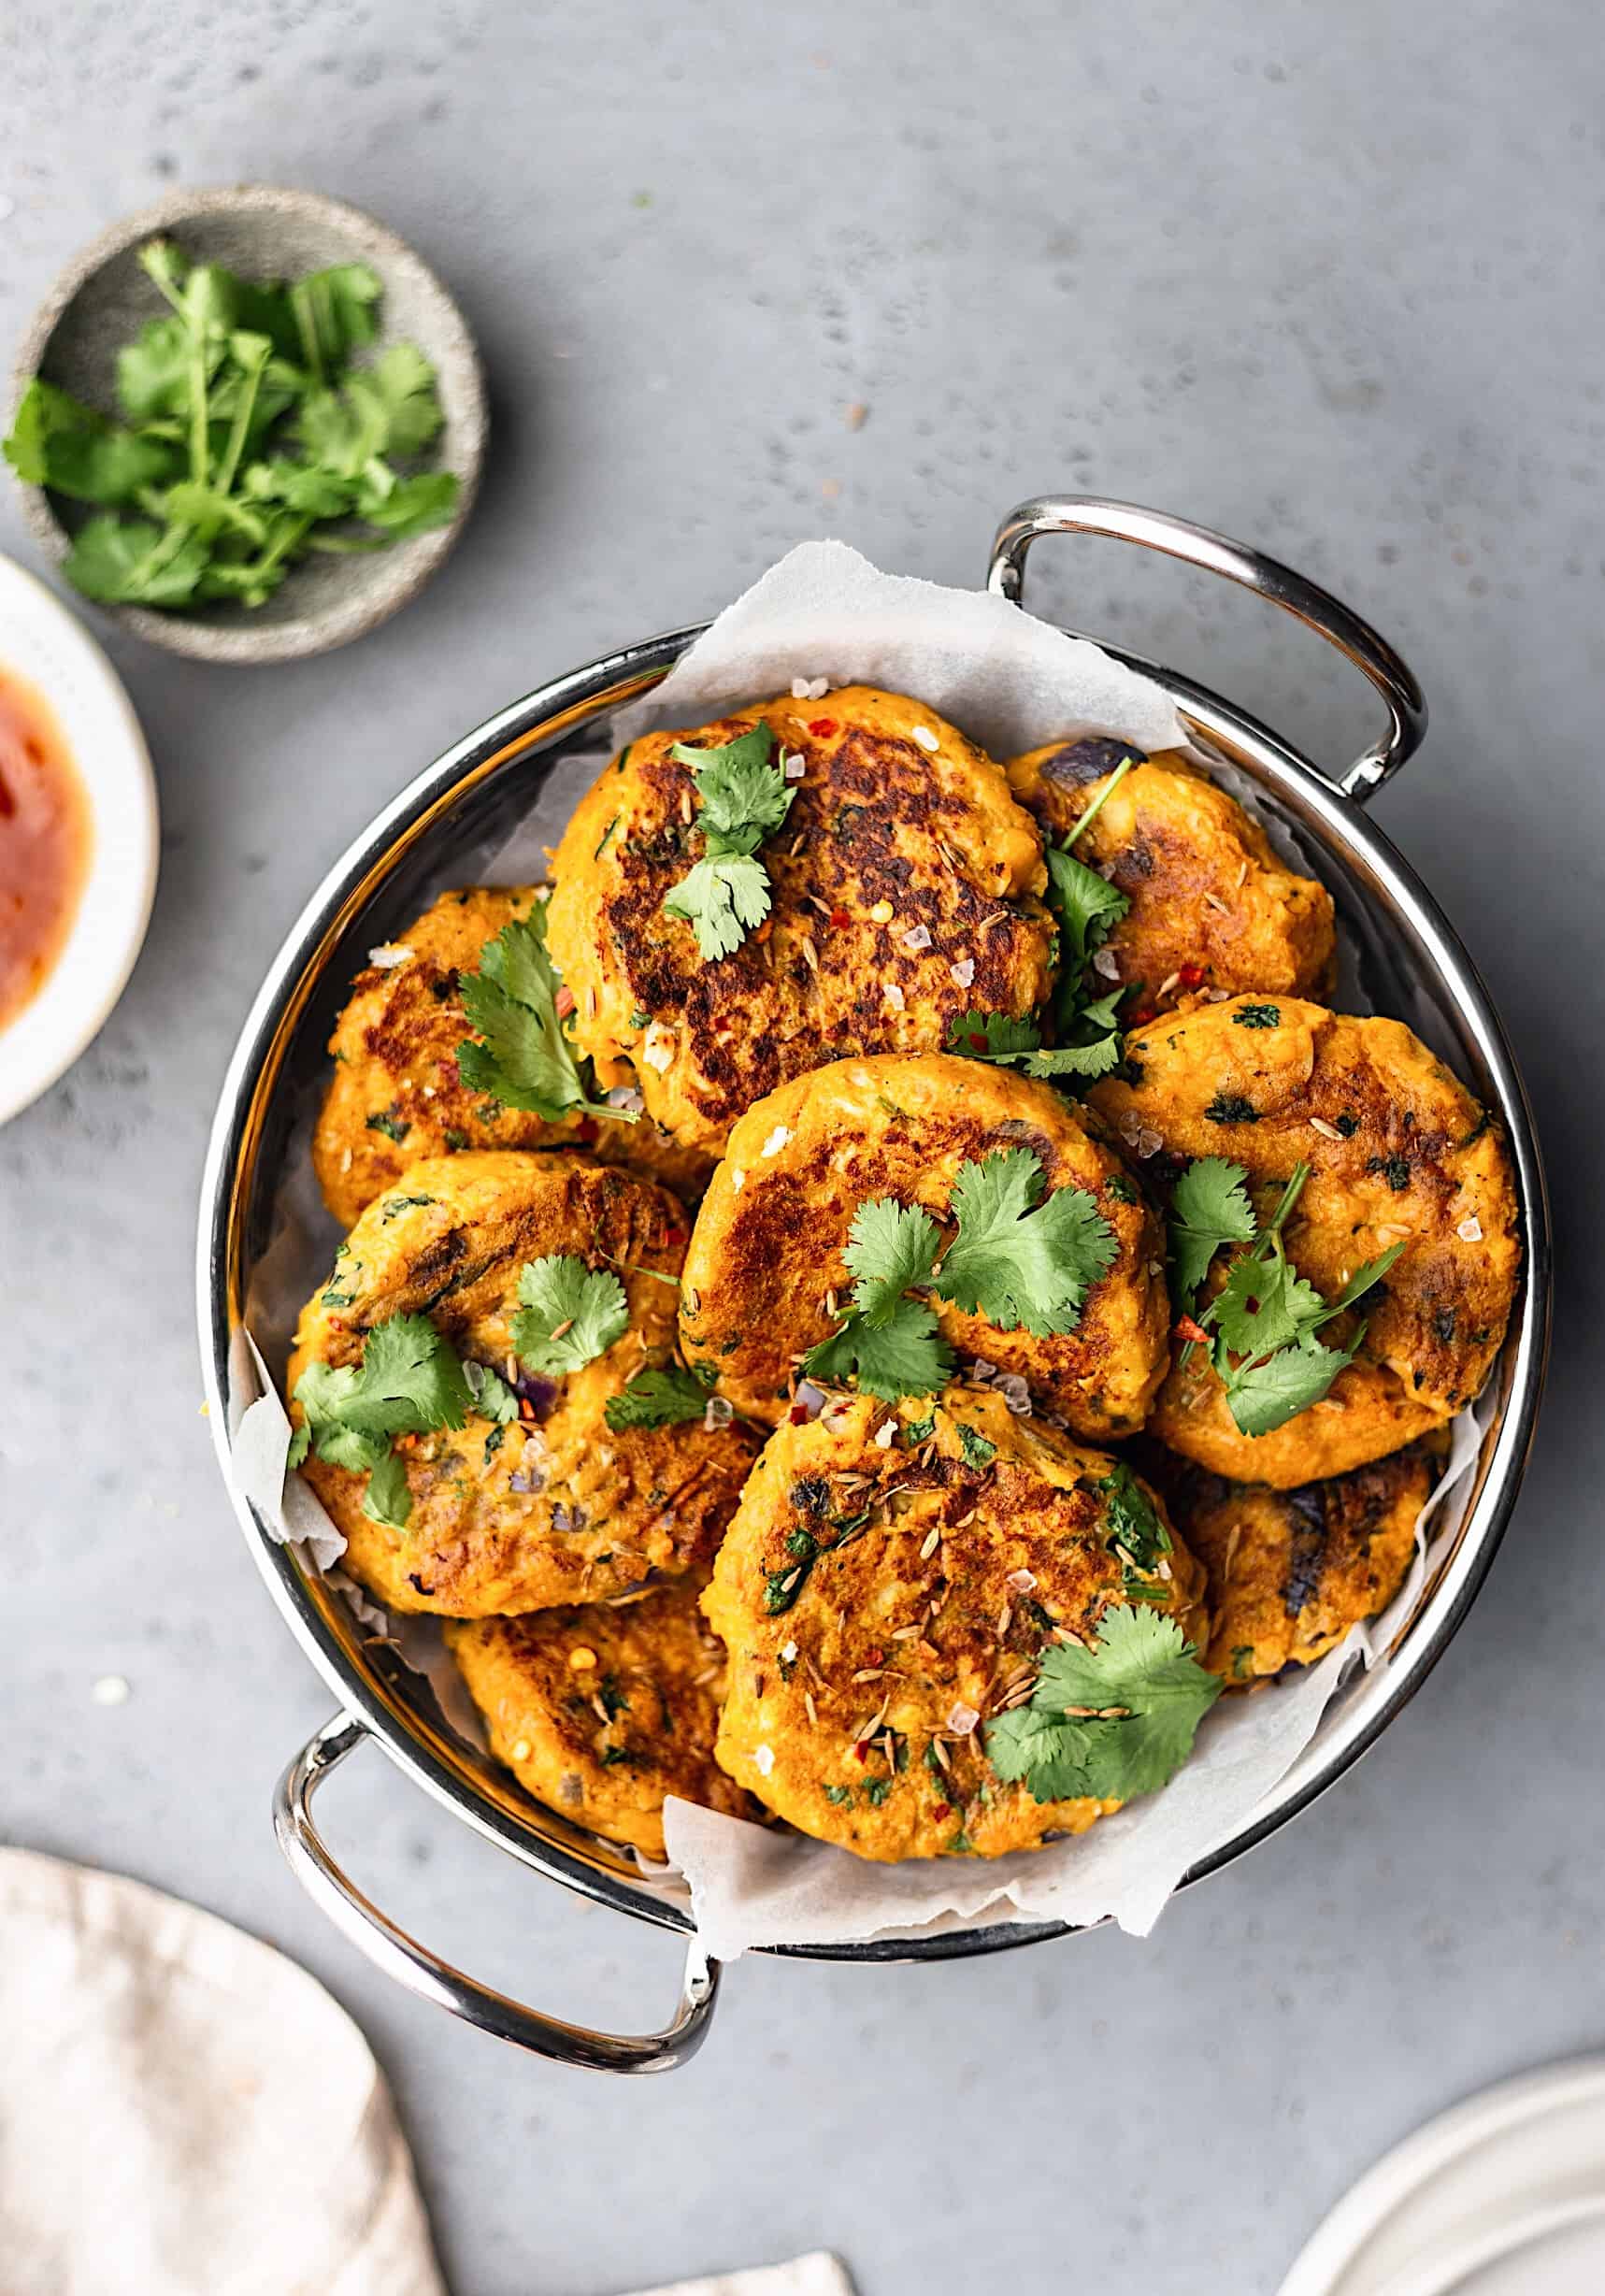 Vegan Curried Sweet Potato and Chickpea Patties #vegan #recipe #food #sweetpotato #chickpea #curried